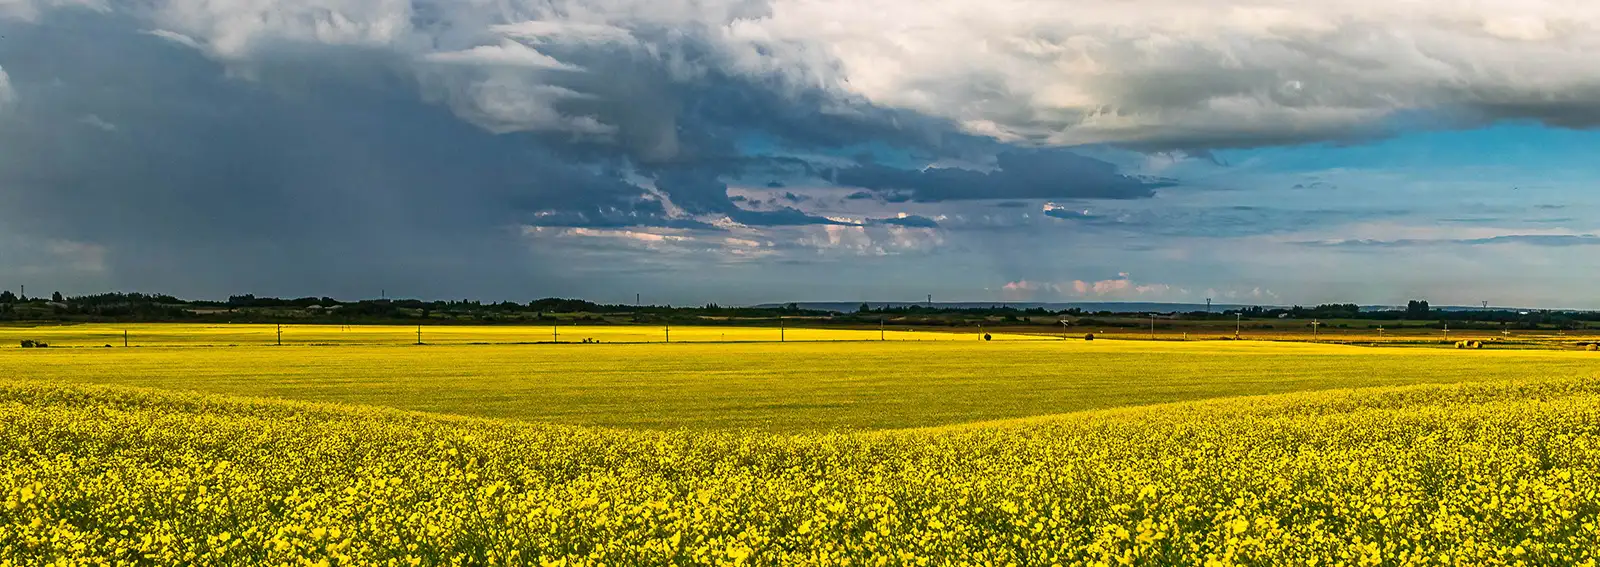 Open canola field with trees off in the horizon with a blue sky with large white clouds